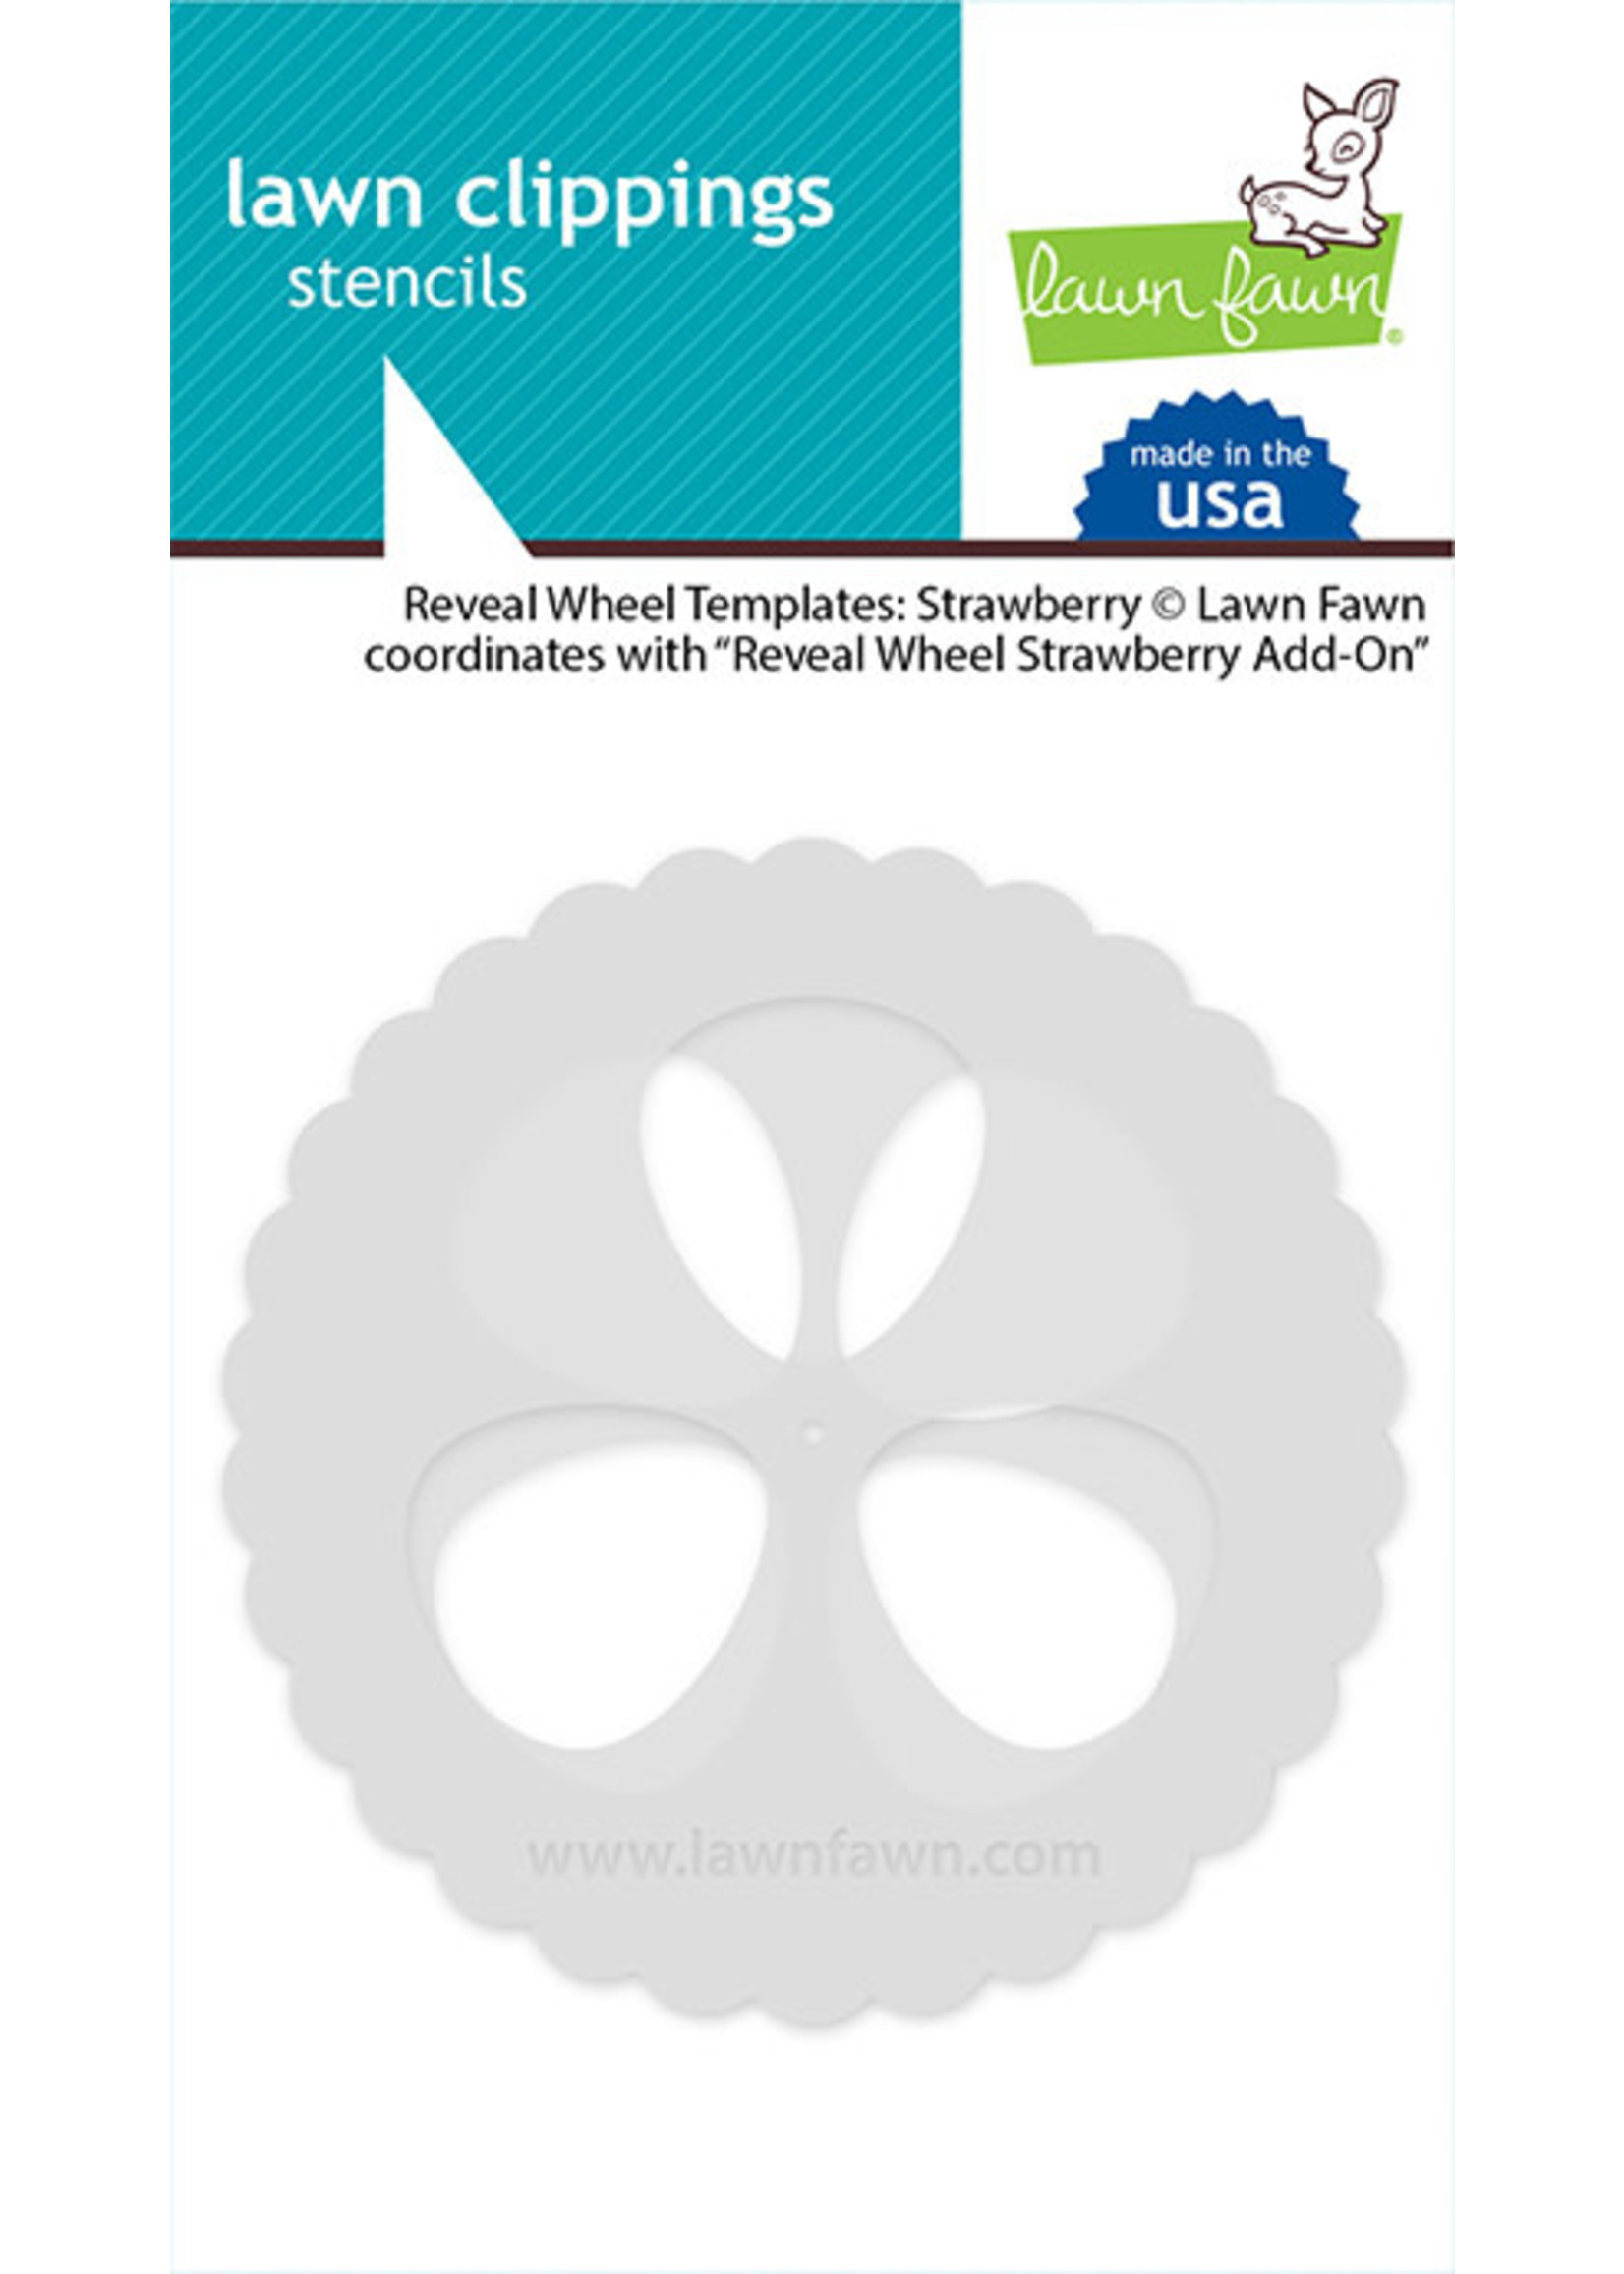 Lawn Fawn reveal wheel templates: strawberry